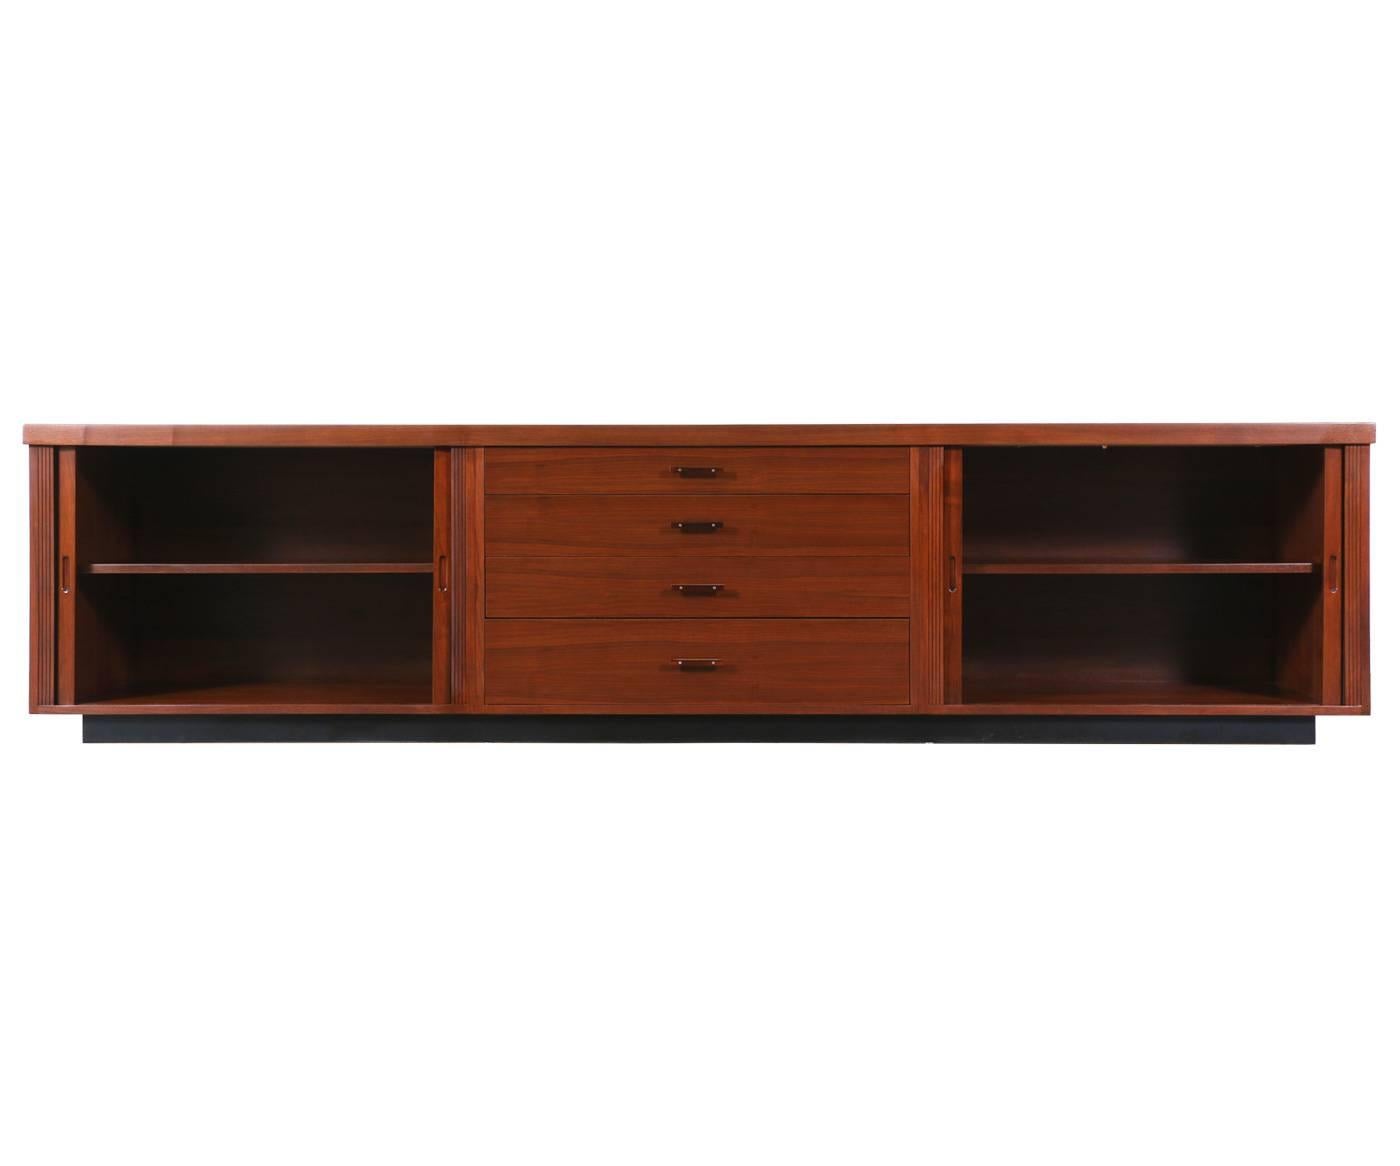 Designer: Glenn of California
Manufacturer: Glenn of California
Period/Style: Mid Century Modern
Country: Unites States
Date: 1950s

Dimensions: 26.25″H x 108.75″L x 18.75″W
Materials: Walnut, Black Laminate Top
Condition: Excellent – Newly